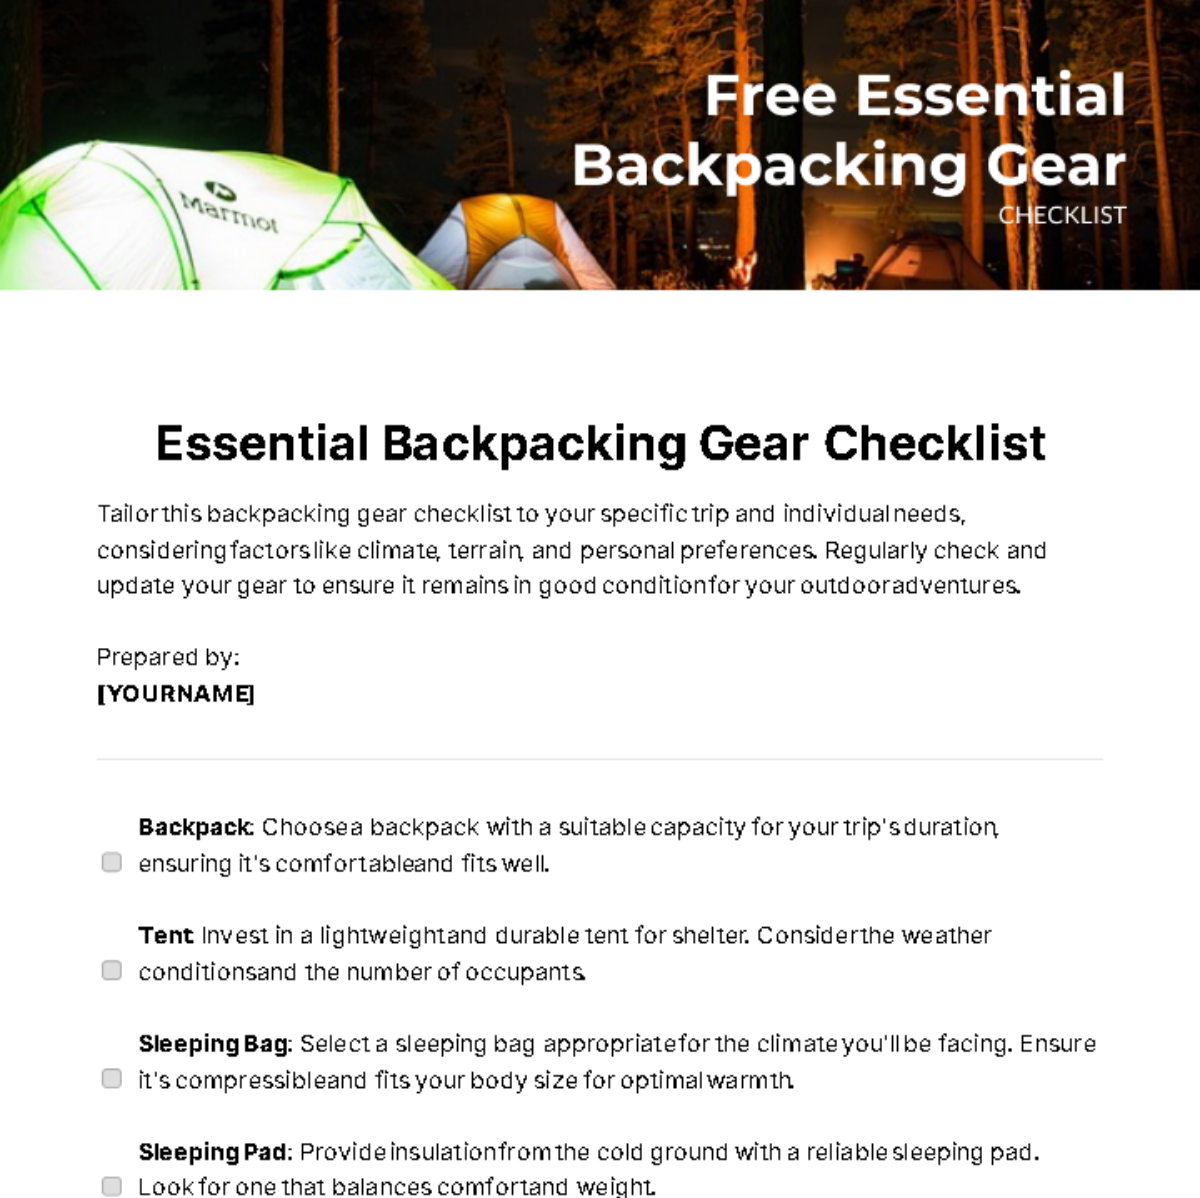 Essential Backpacking Gear Checklist Template